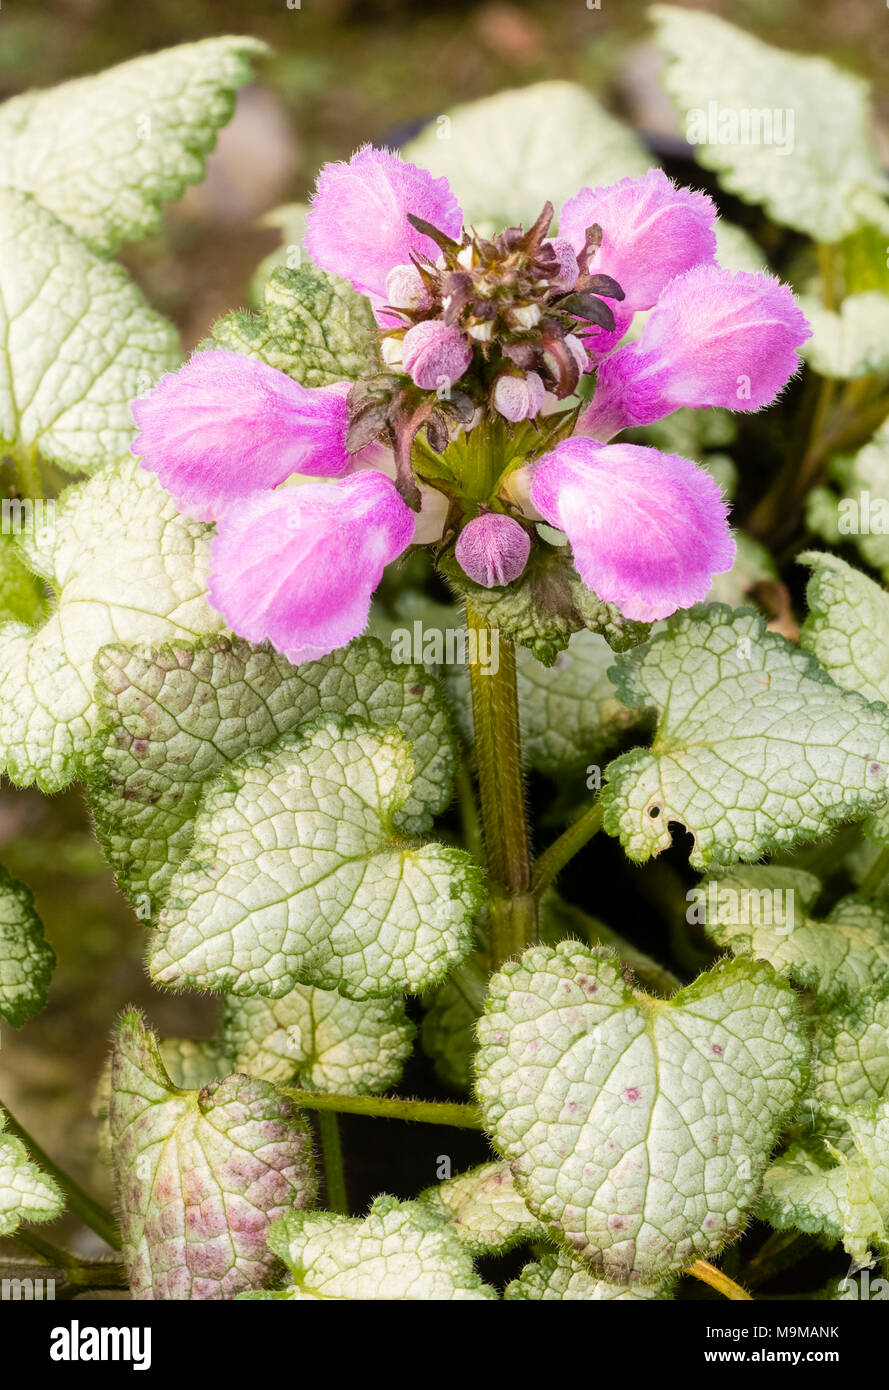 Flower head and foliage of the hardy ground cover perennial, Lamium maculatum 'Beacon Silver' Stock Photo